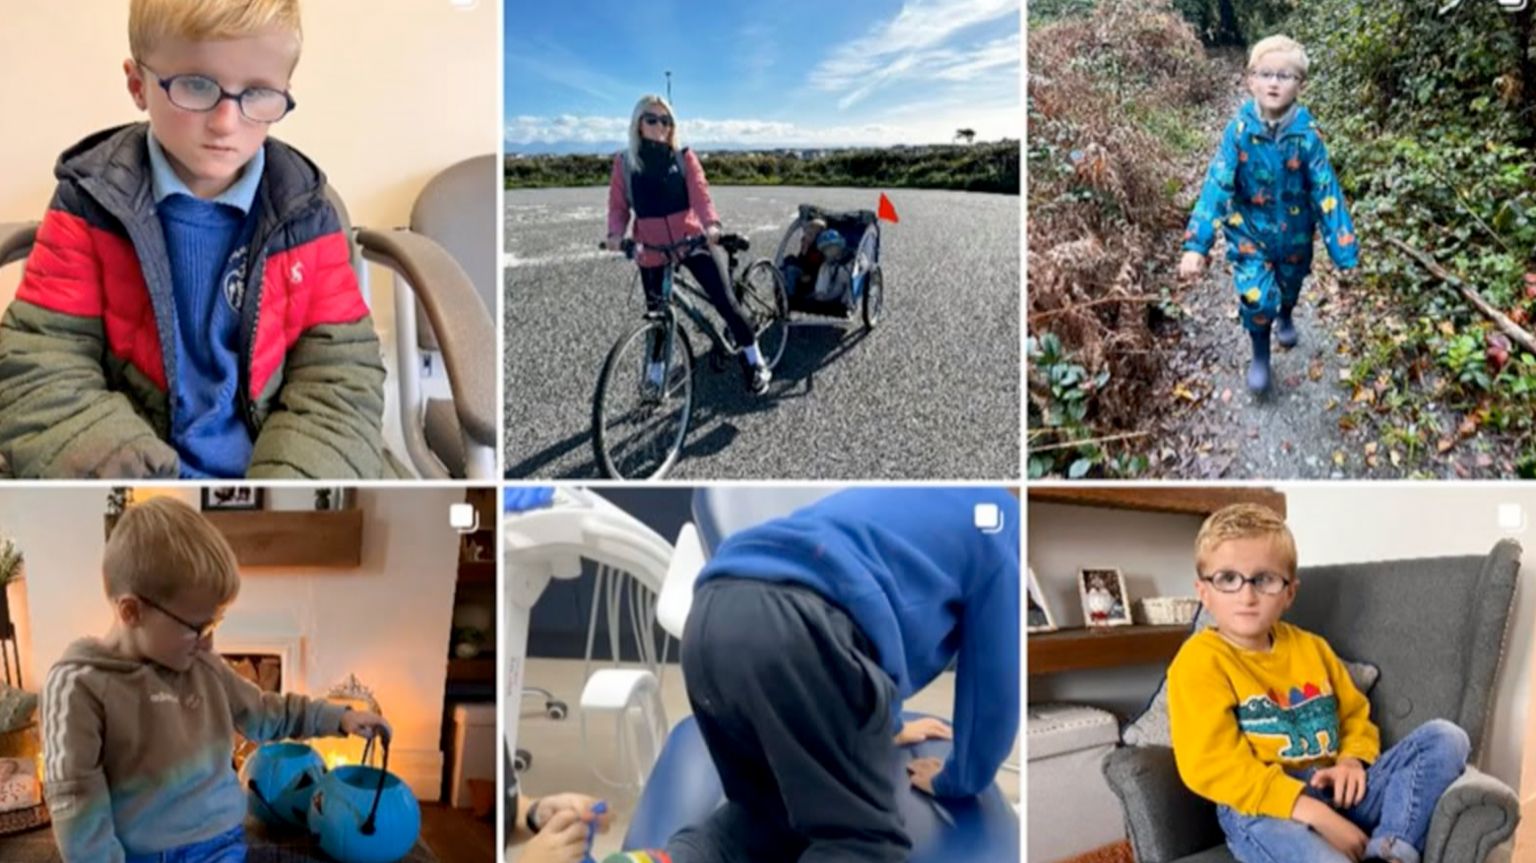 Six images posted on Instagram showing Noa including, clockwise from top left - Noa in school uniform and coat, mother Sophie with a bike and cycle chariot attached with Noa inside, Noa outside wearing blue rain coat and wellie, Noa sat on an armchair wearing a yellow sweater with a dinosaur image on it, Noa clambering on a dentist chair, Noa with his blue pumpkin bucket